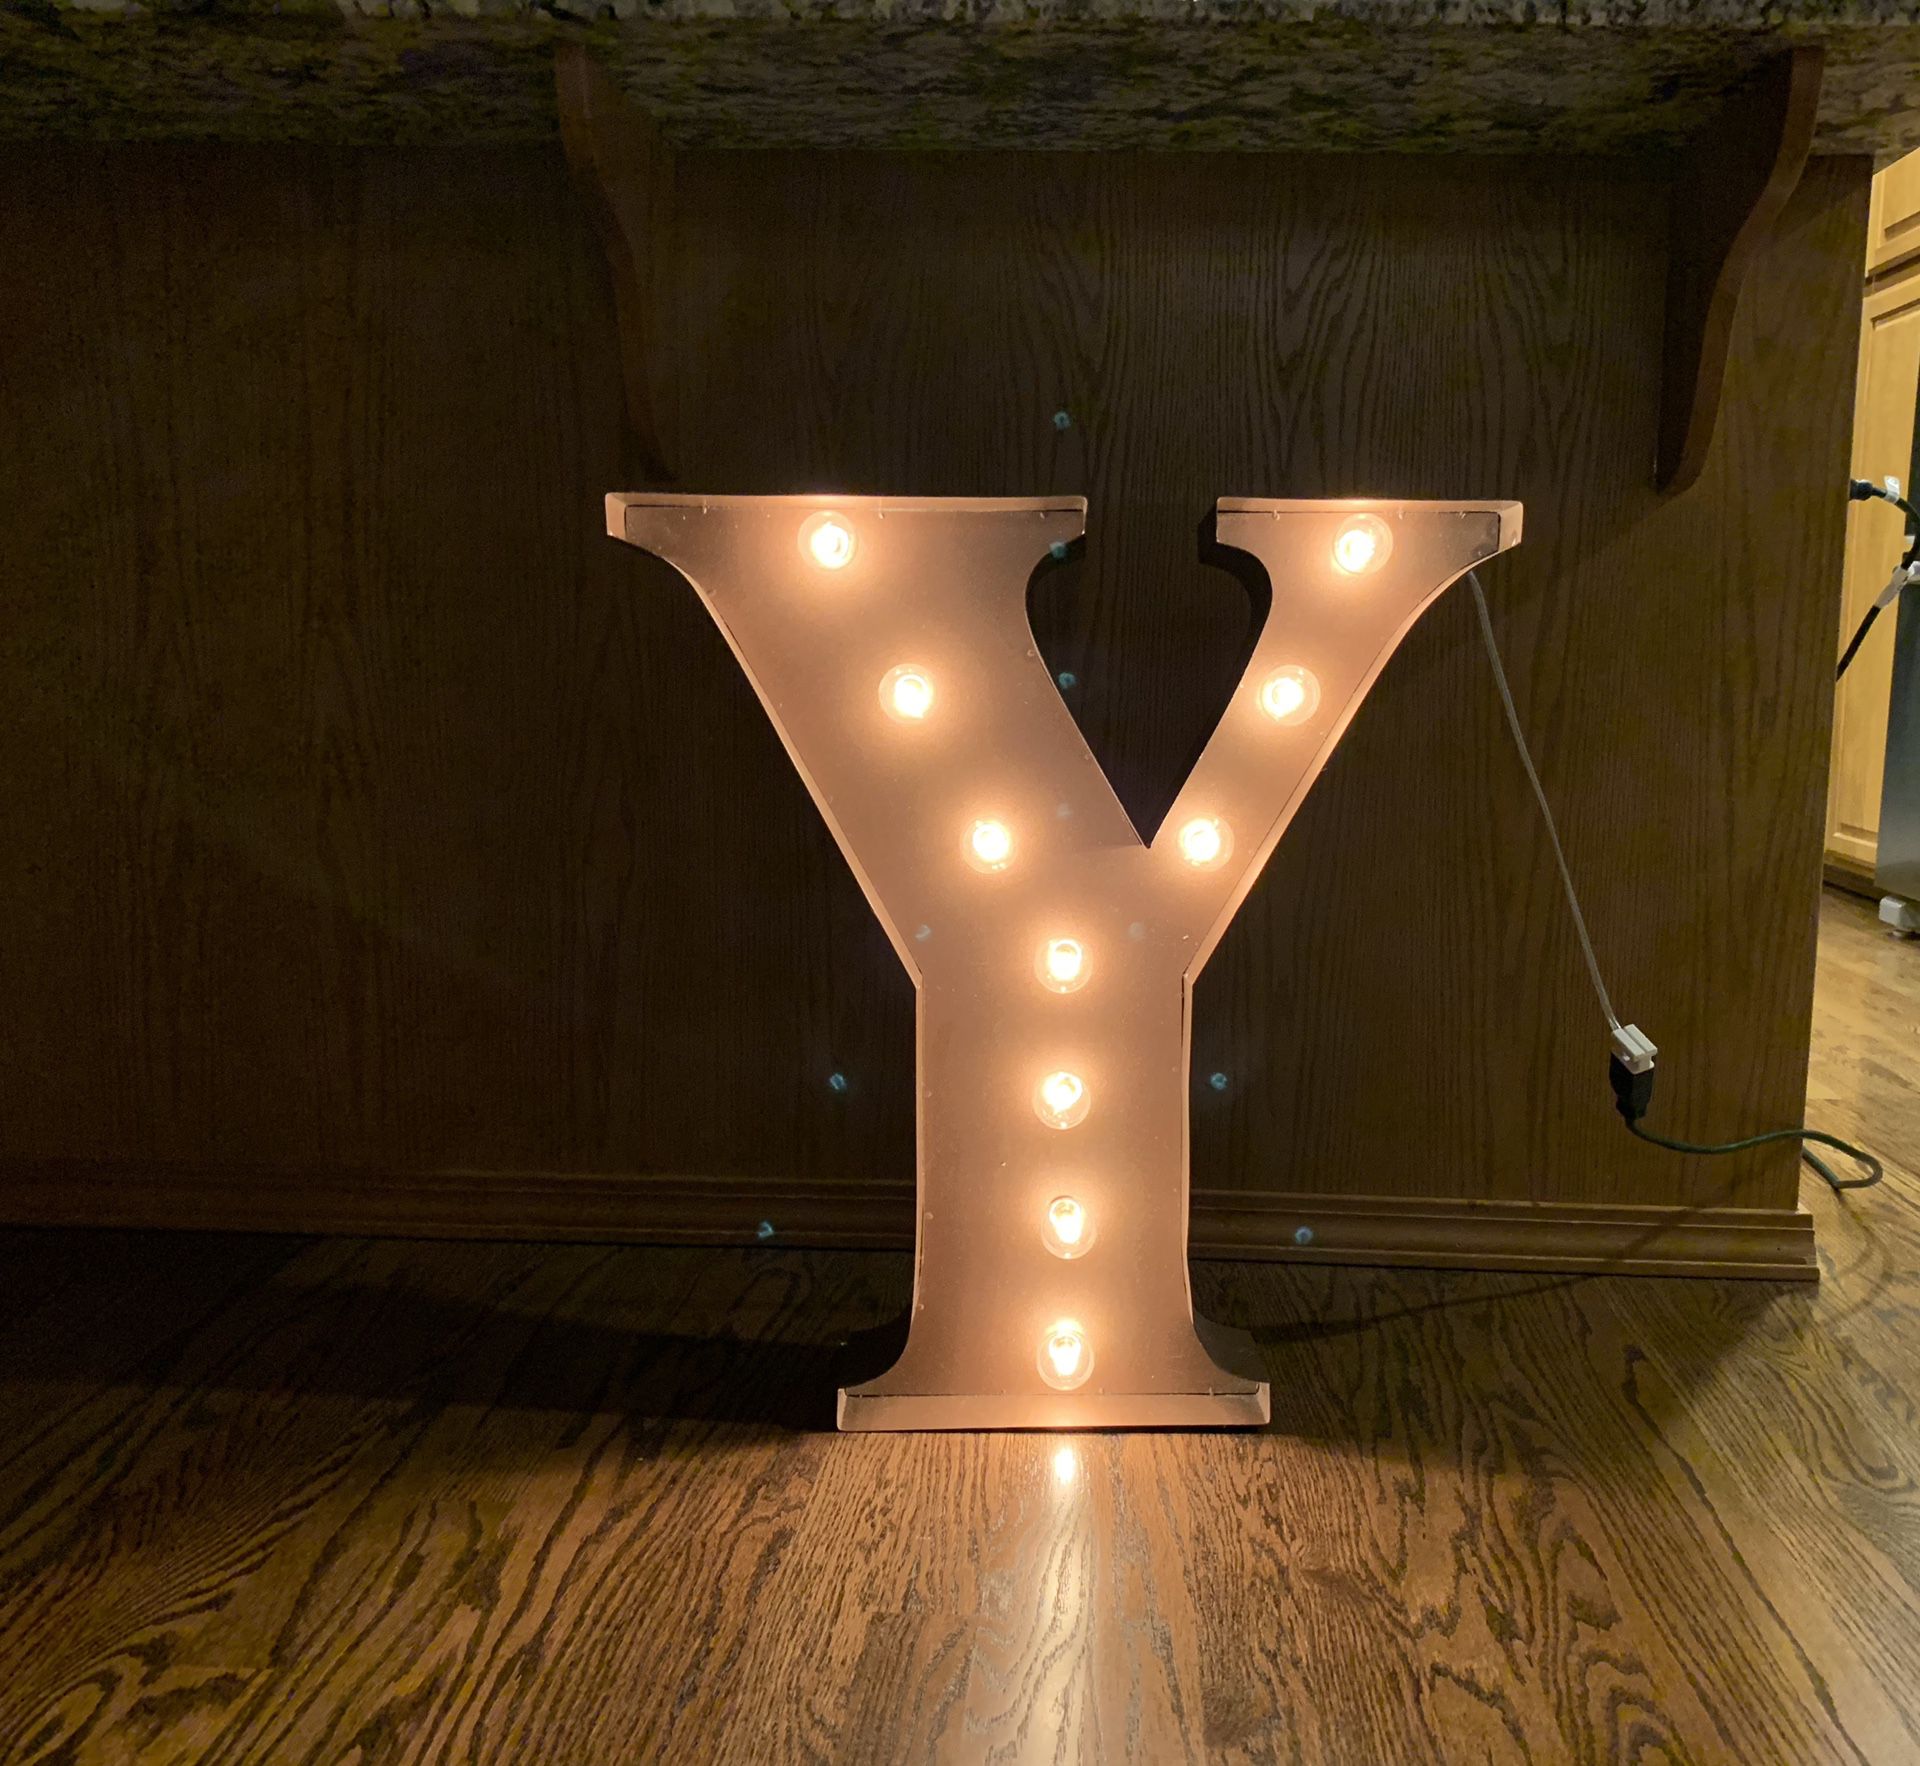 “Y” Large Marquee Letter Light perfect for home / wedding decor 24 inches tall